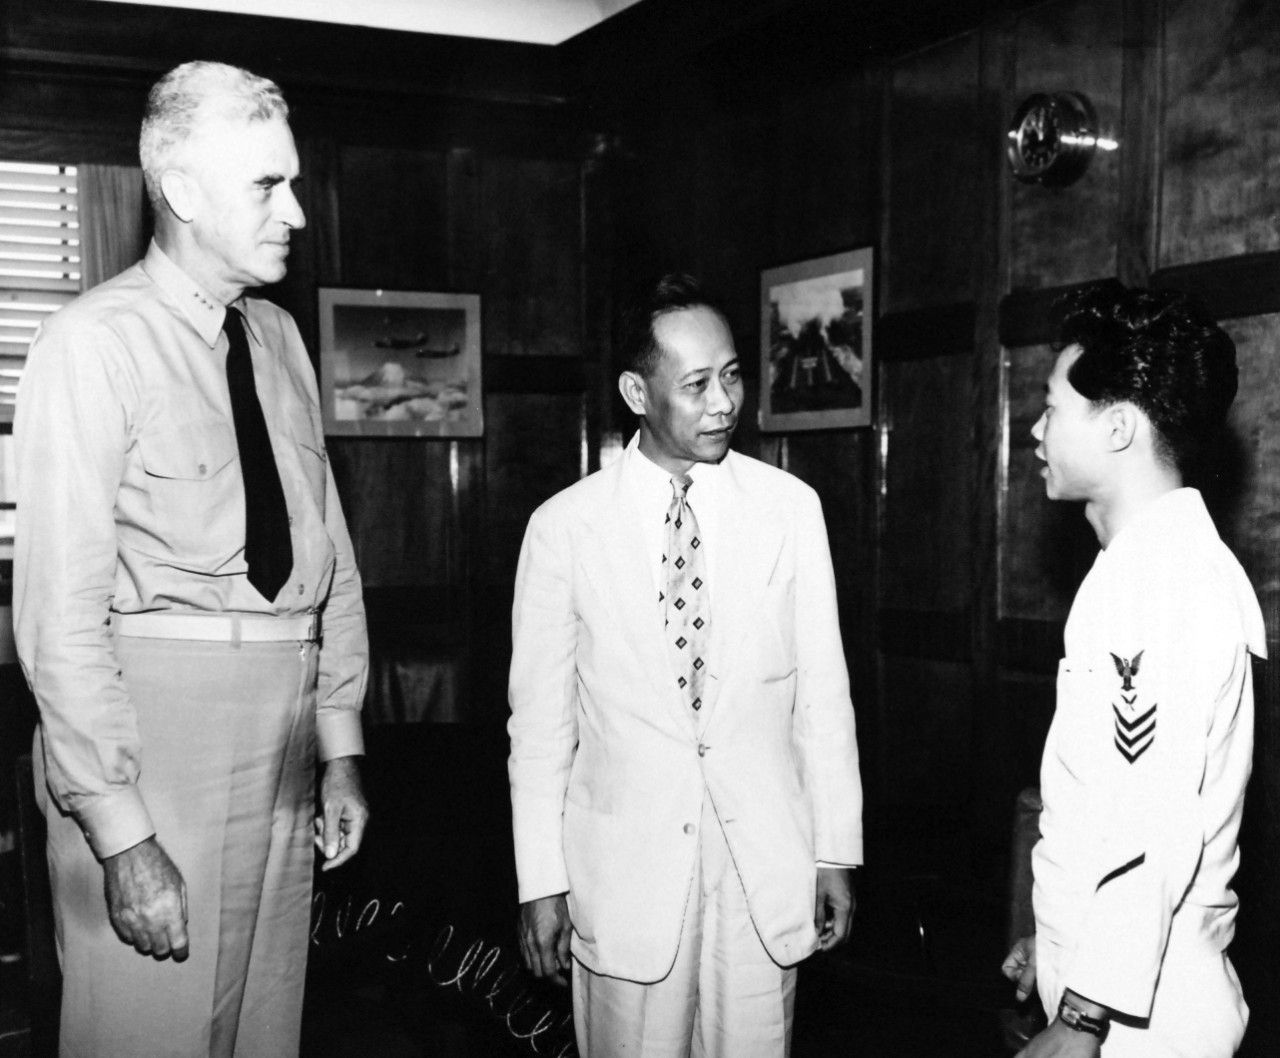 80-G-680509:  YN1 Gertrudo Lim, late 1940s-early 1950s.   Vice Admiral William M. Callaghan, left, introduces YN1 Gertrudo Lim to Dr. Jose F. Imperial, center, Minister to Japan from the Republic of the Philippines when he called at the Admiral’s headquarters.  Lim is attached to Admiral Callaghan’s staff at Yokosuka, Japan.   Official U.S. Navy Photograph, now in the collections of the National Archives.  